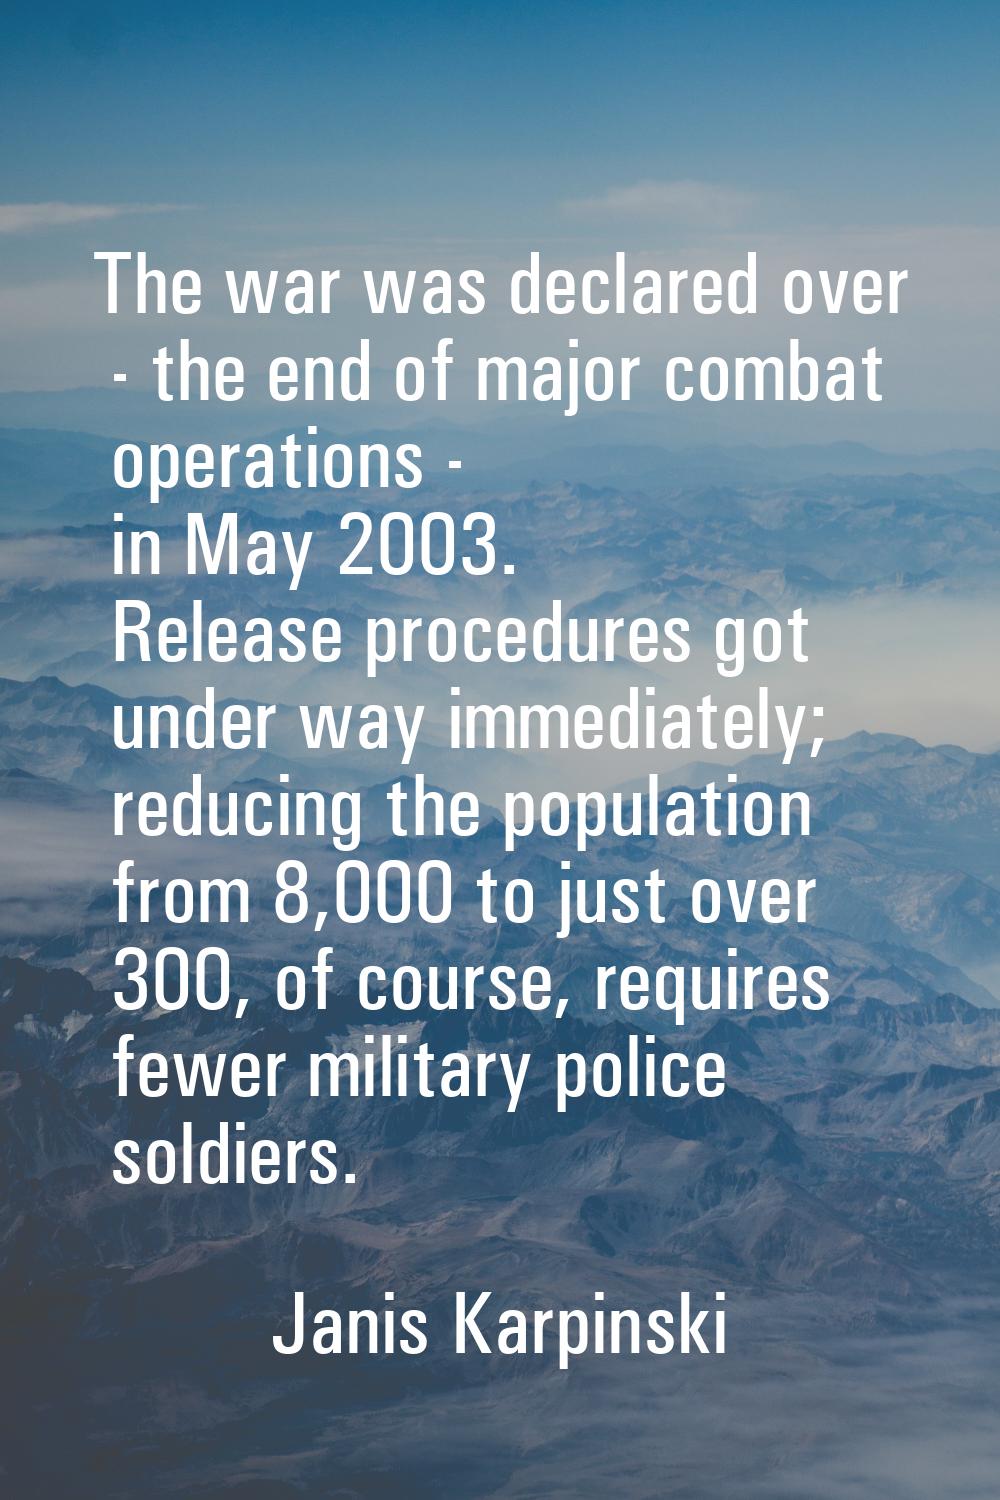 The war was declared over - the end of major combat operations - in May 2003. Release procedures go